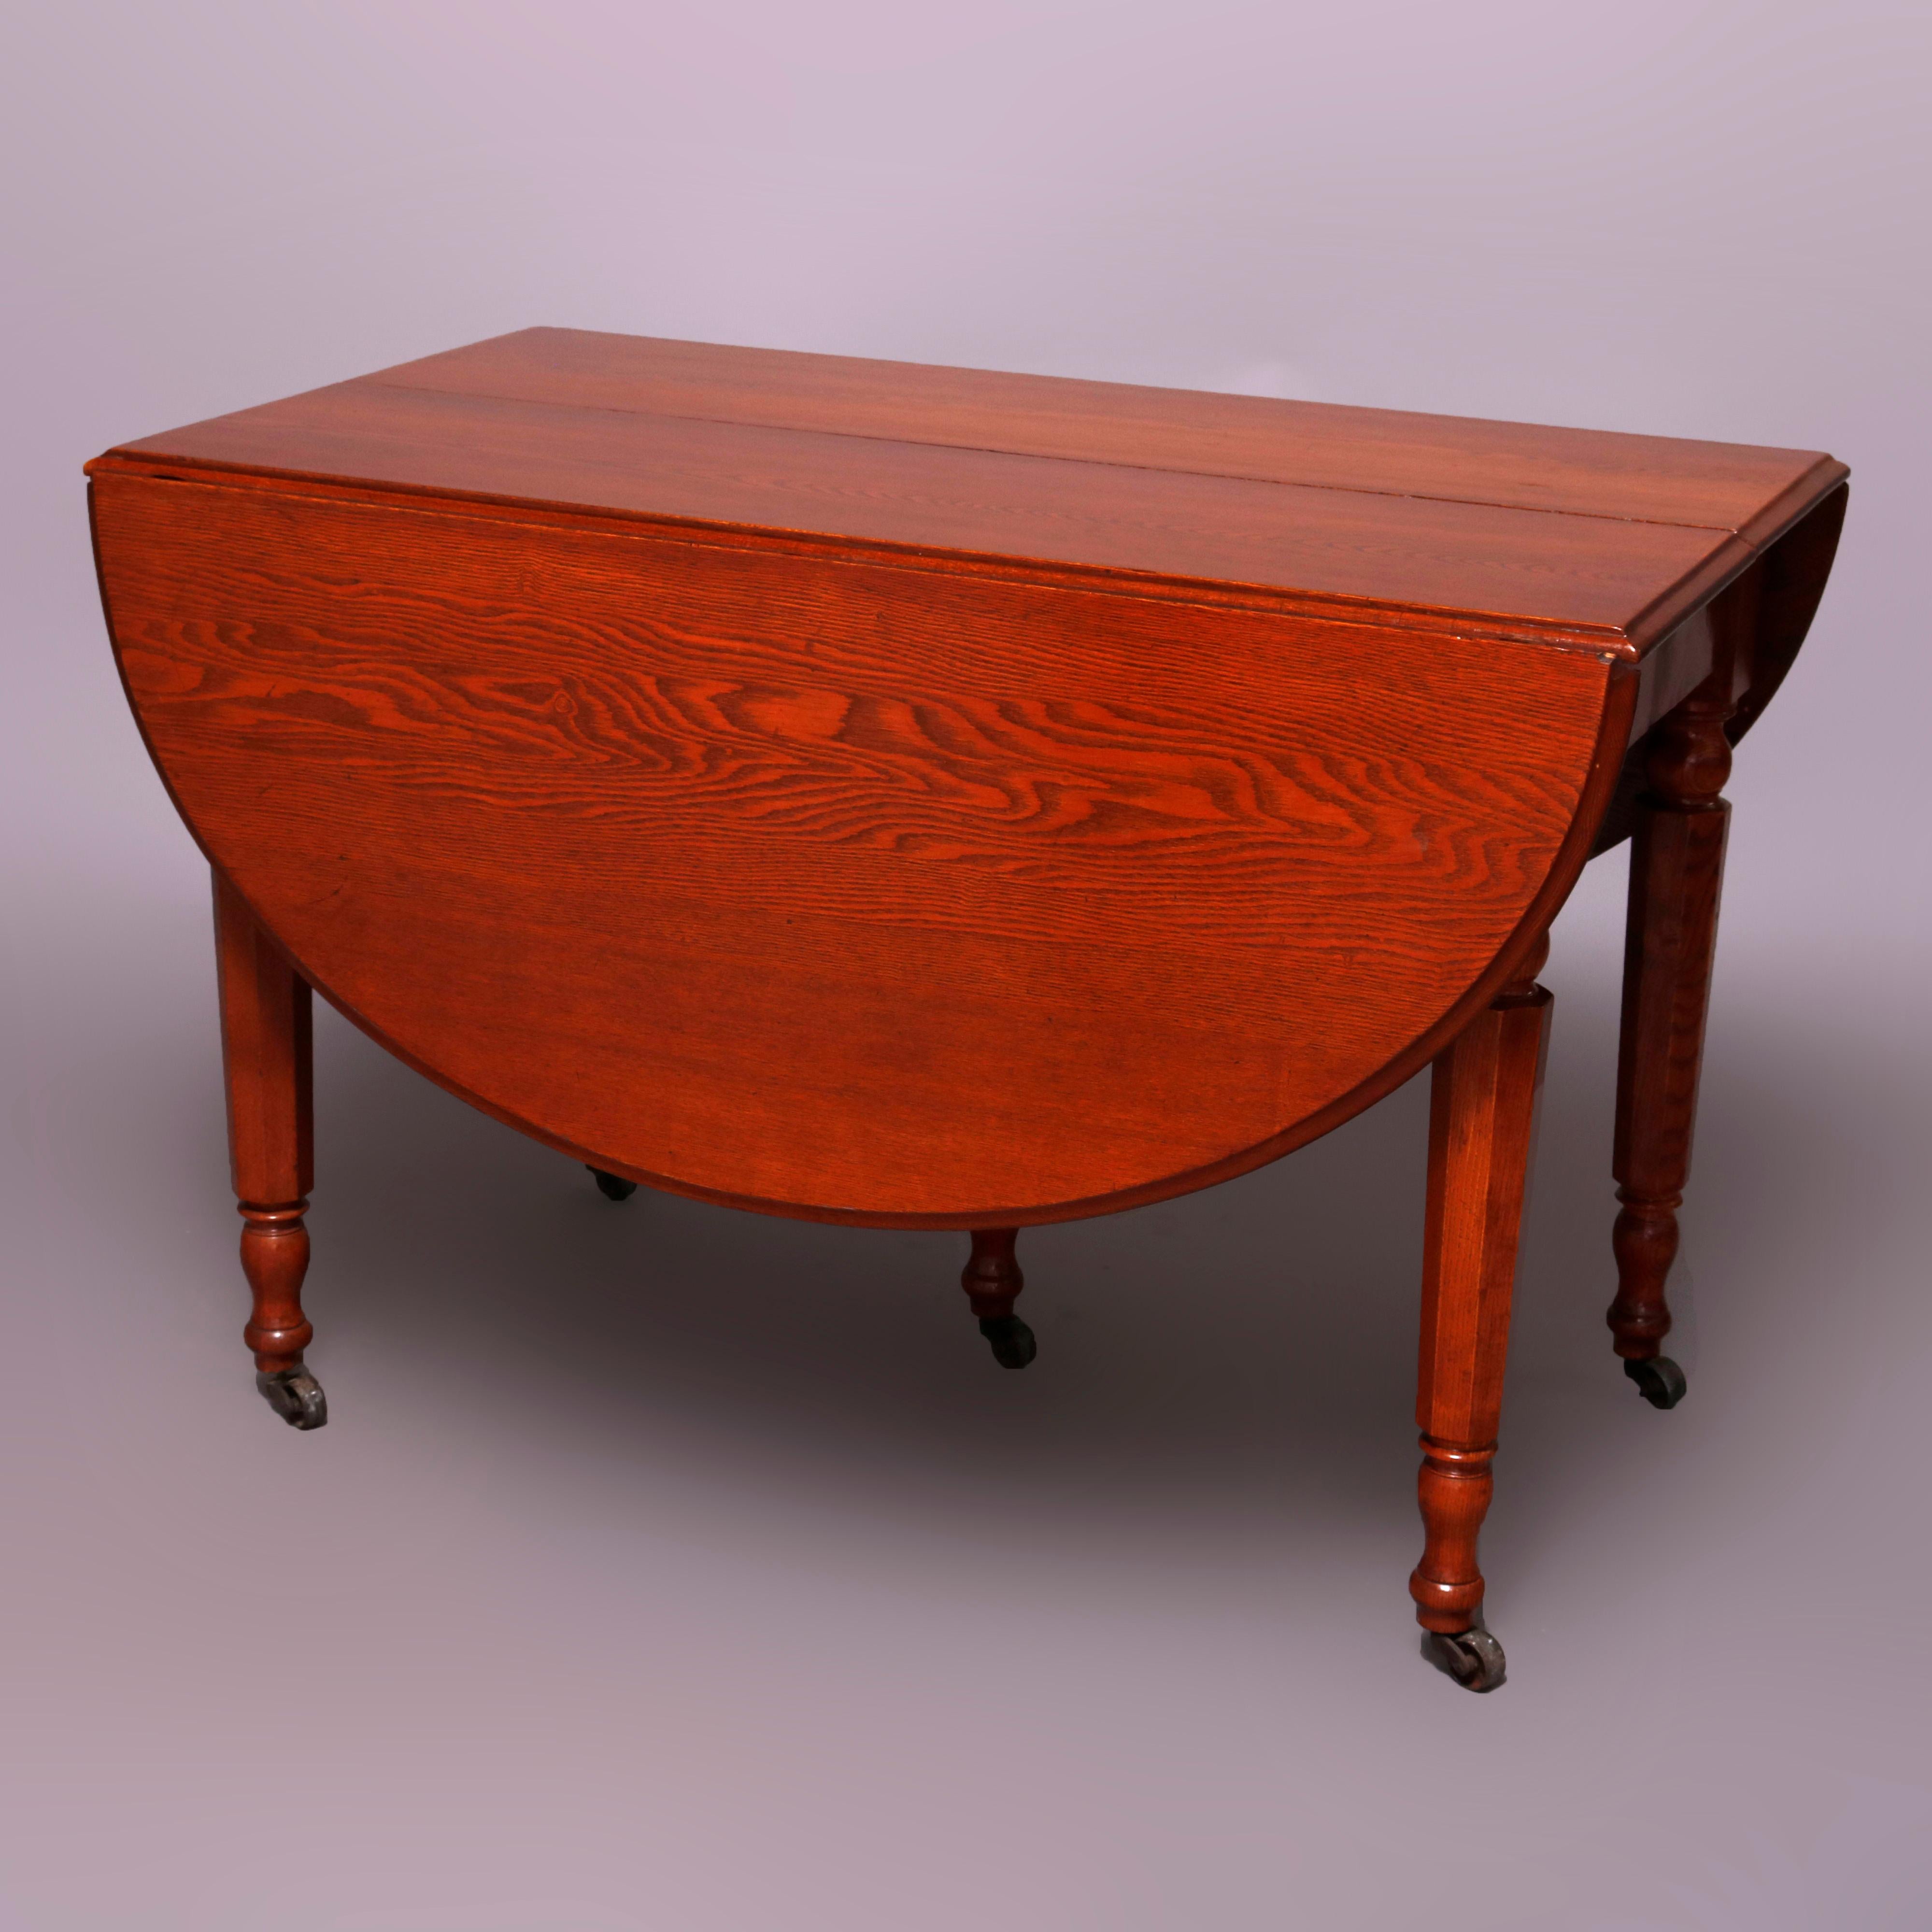 American Sheraton Chestnut Drop Leaf Banquet Dining Table with 5 Leaves, circa 1910